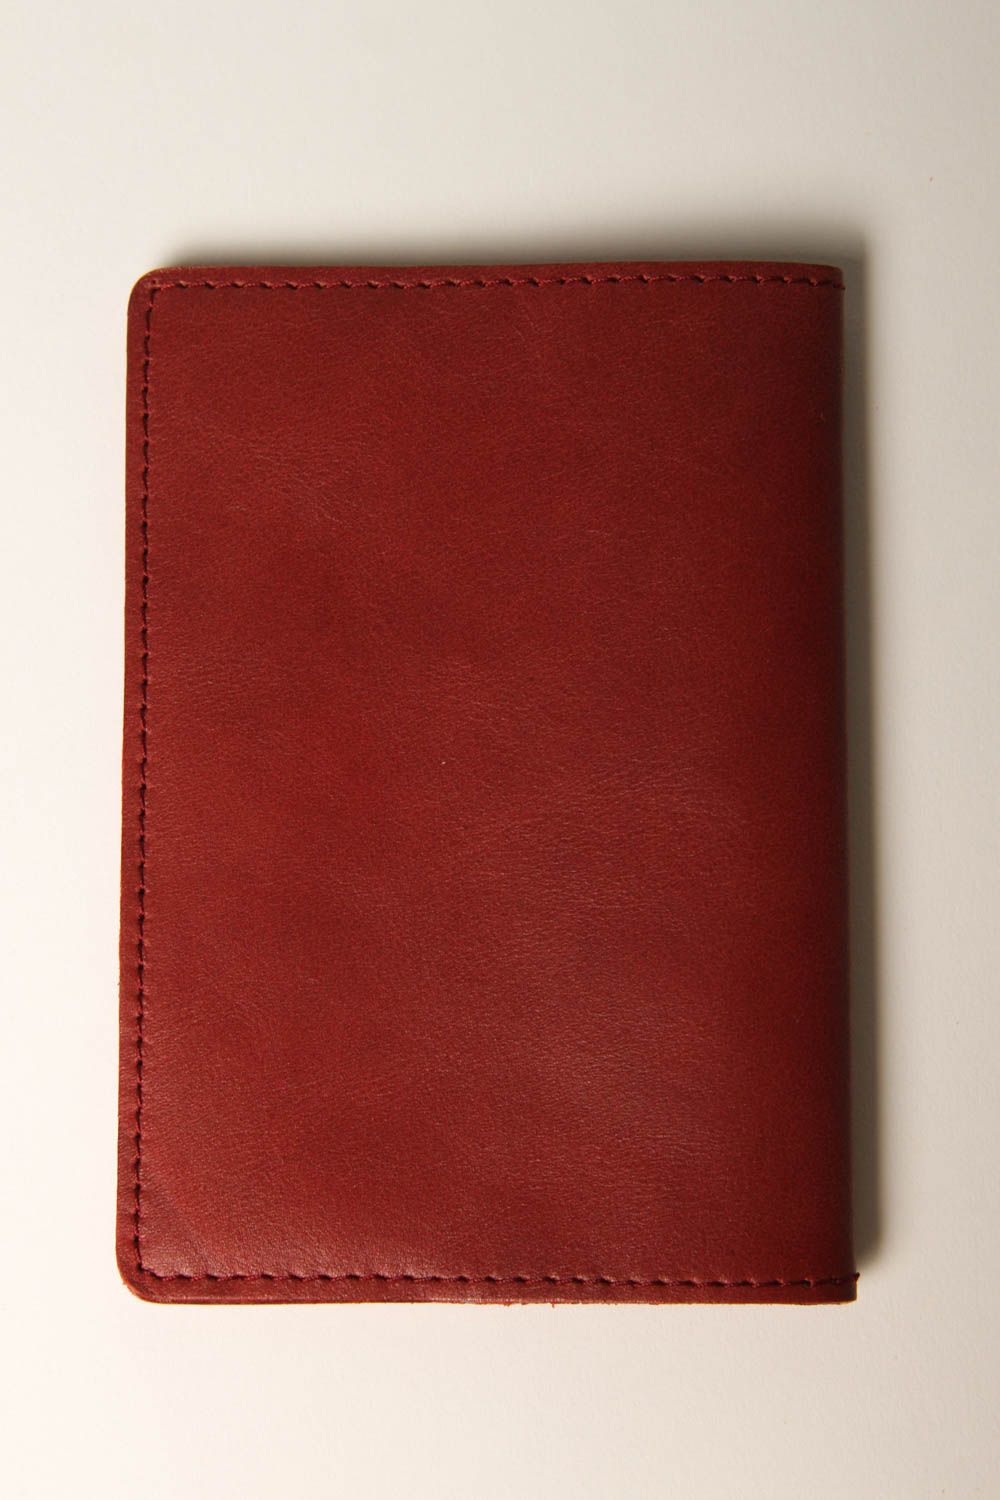 Beautiful handmade passport cover leather cover for documents handmade gifts photo 3